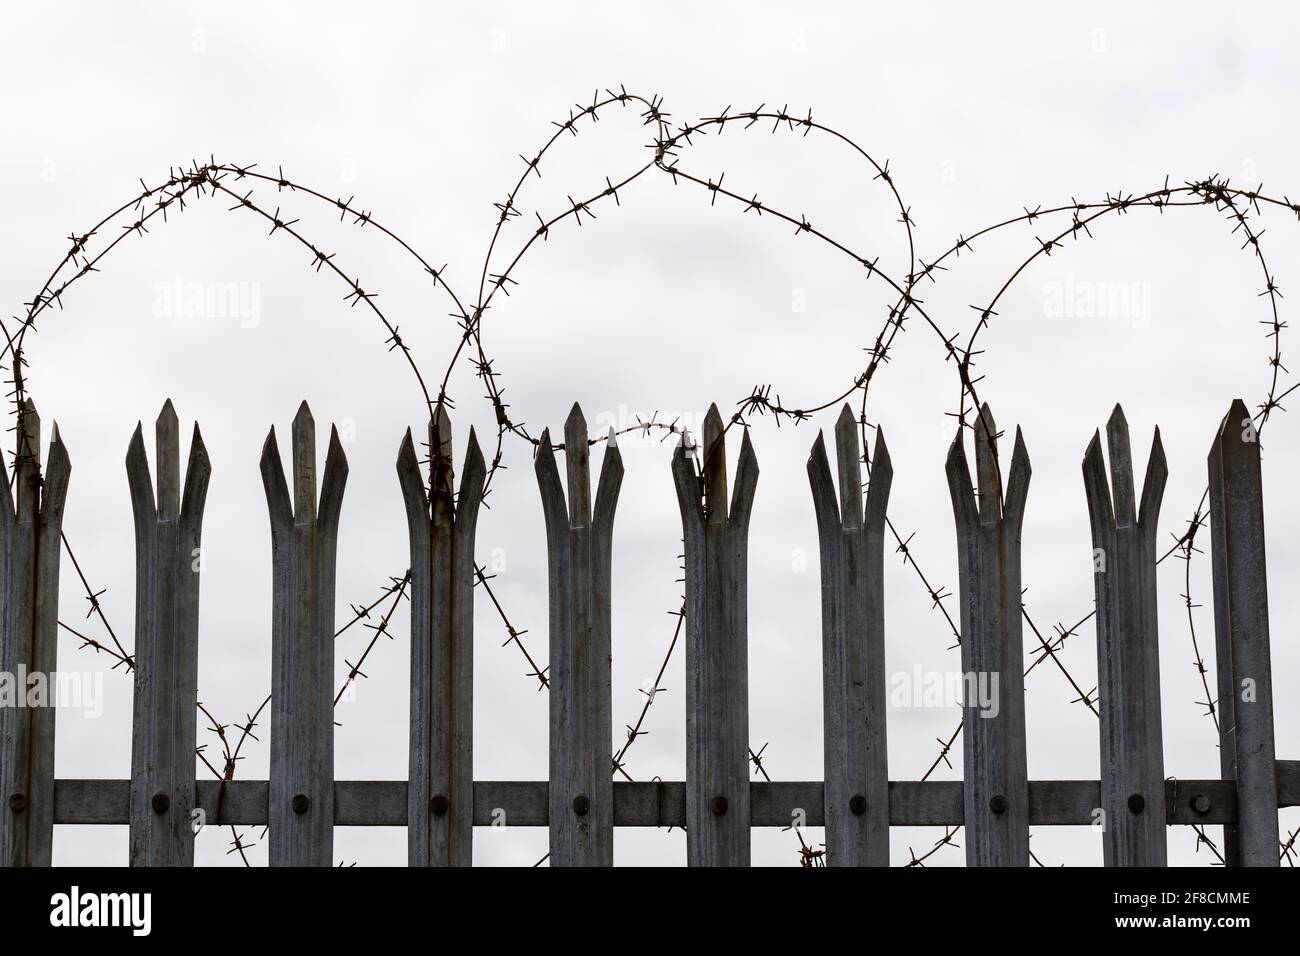 Barbed wire triple point palisade security fence Stock Photo